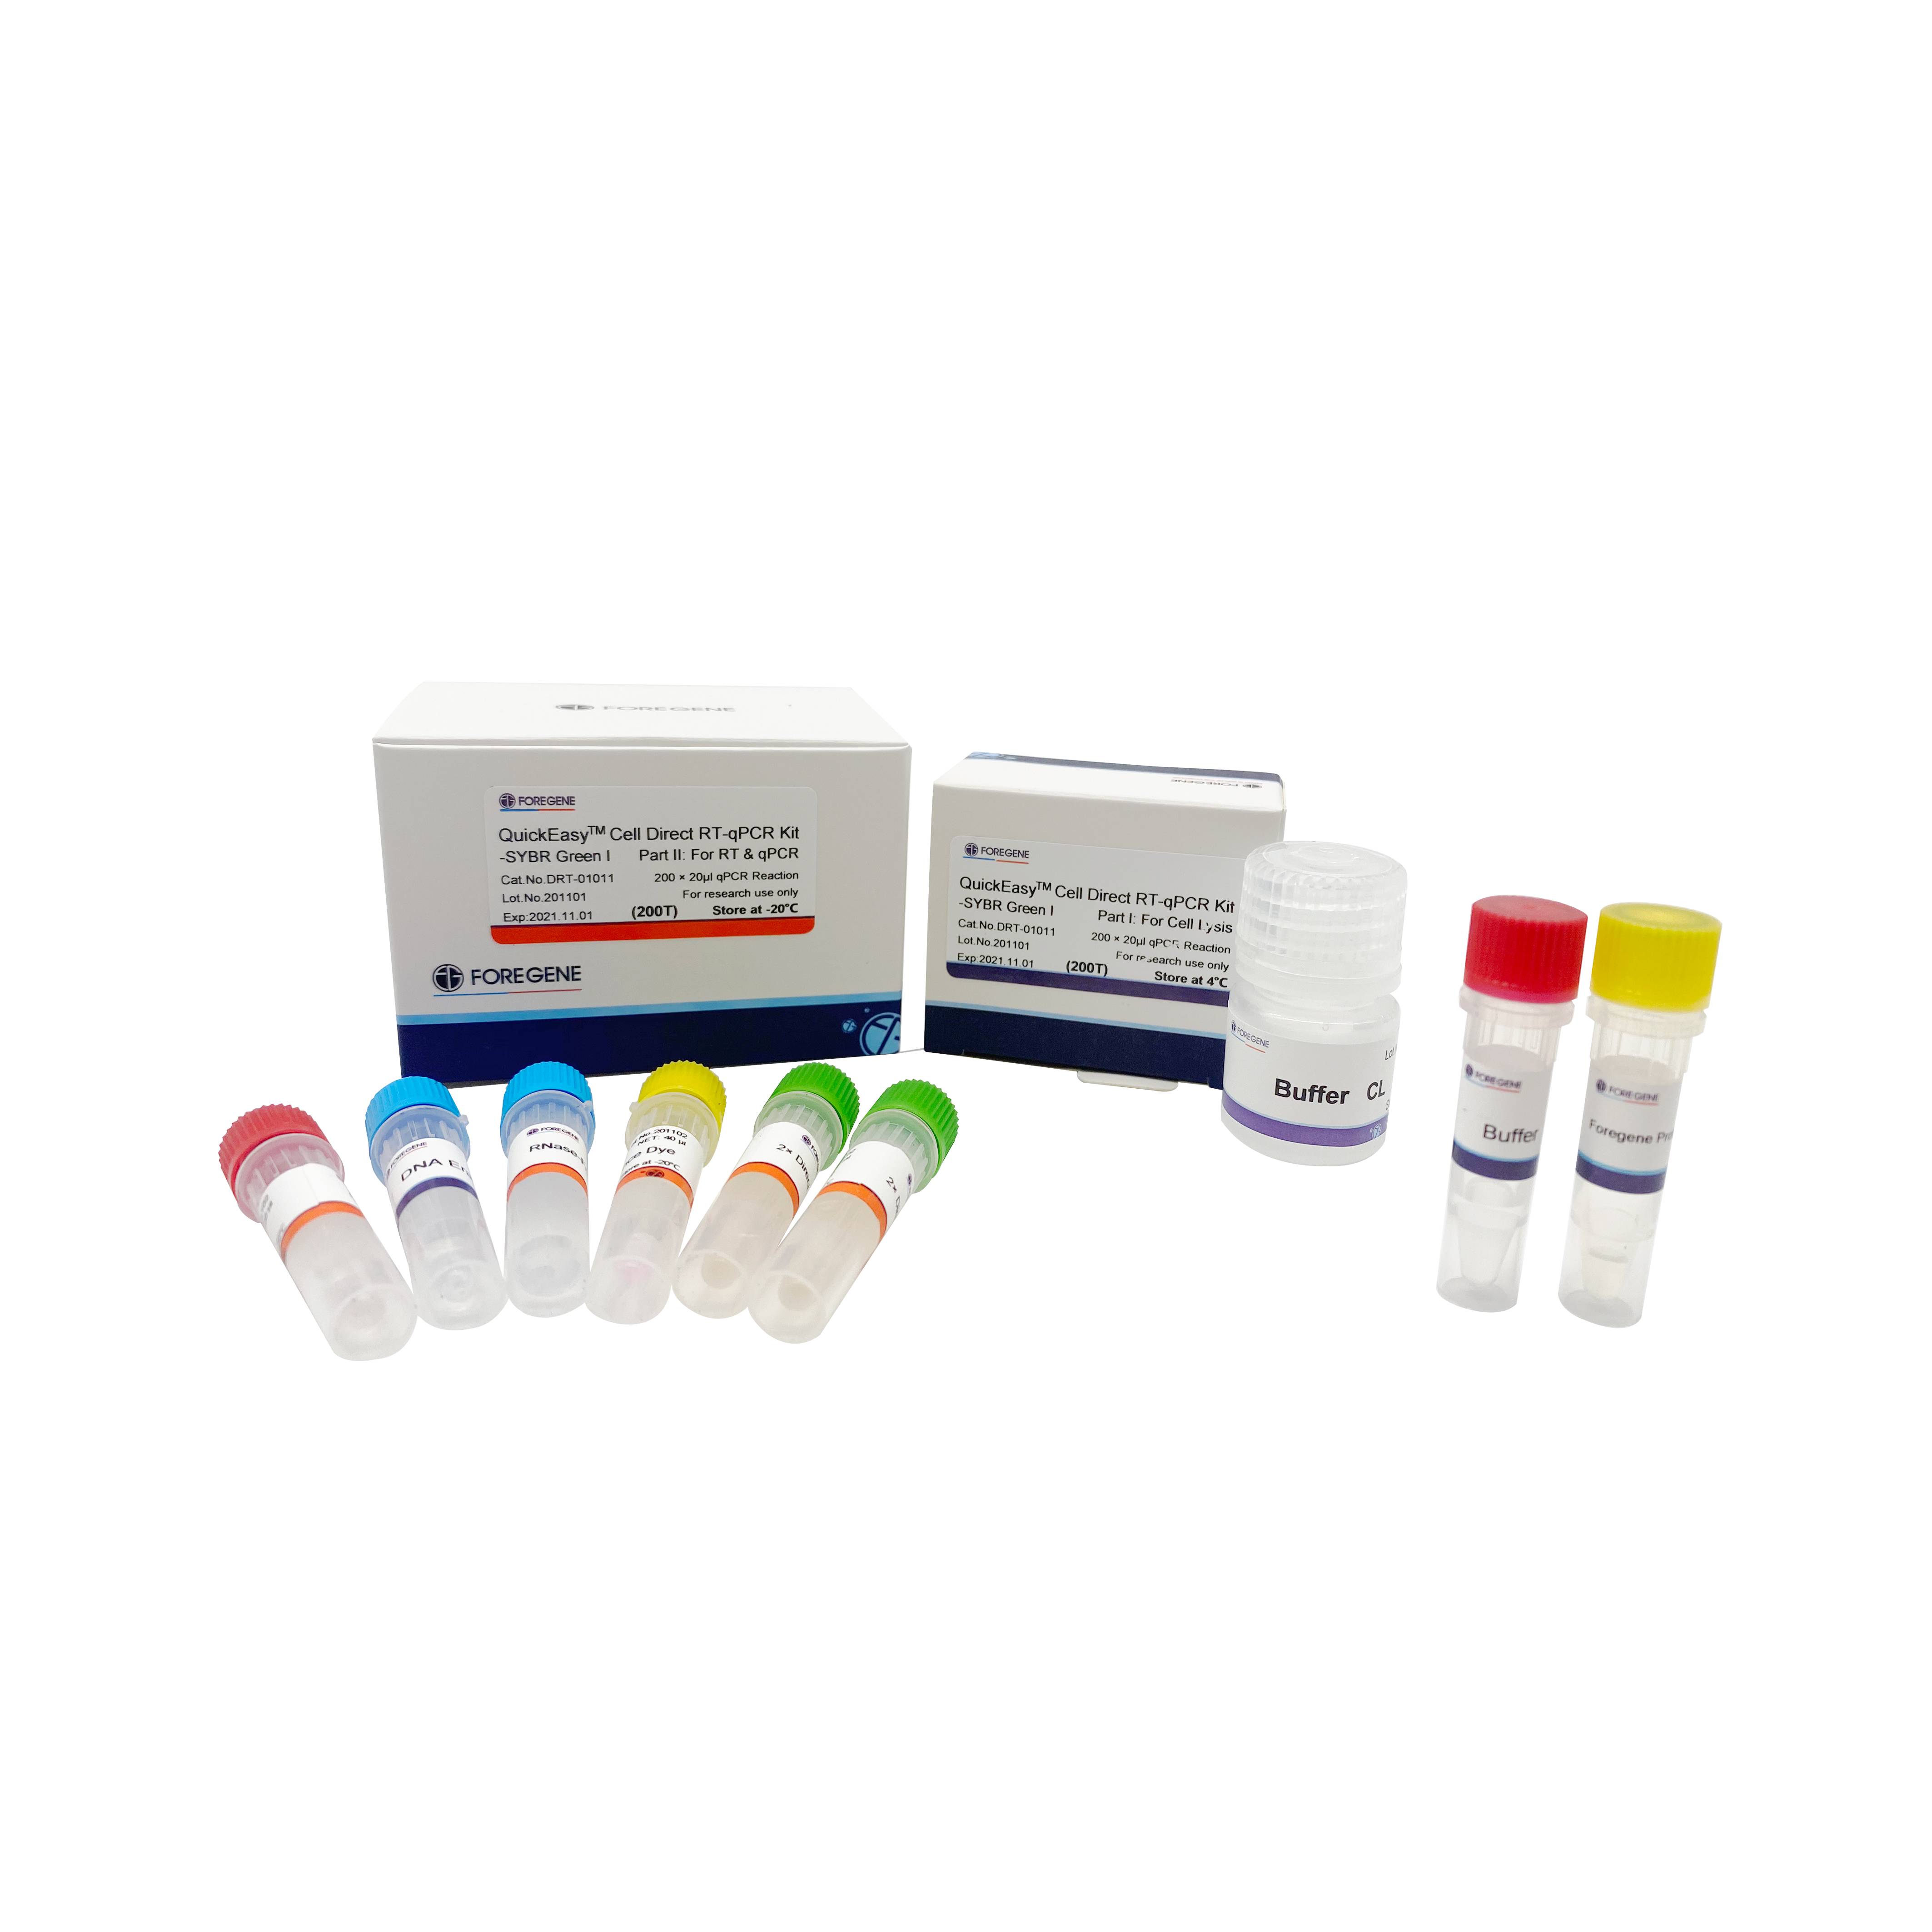 Zestaw Cell Direct RT qPCR — SYBR GREEN I Direct Cell Lysis Zestawy Cell Ready One-step qRT-PCR Kit